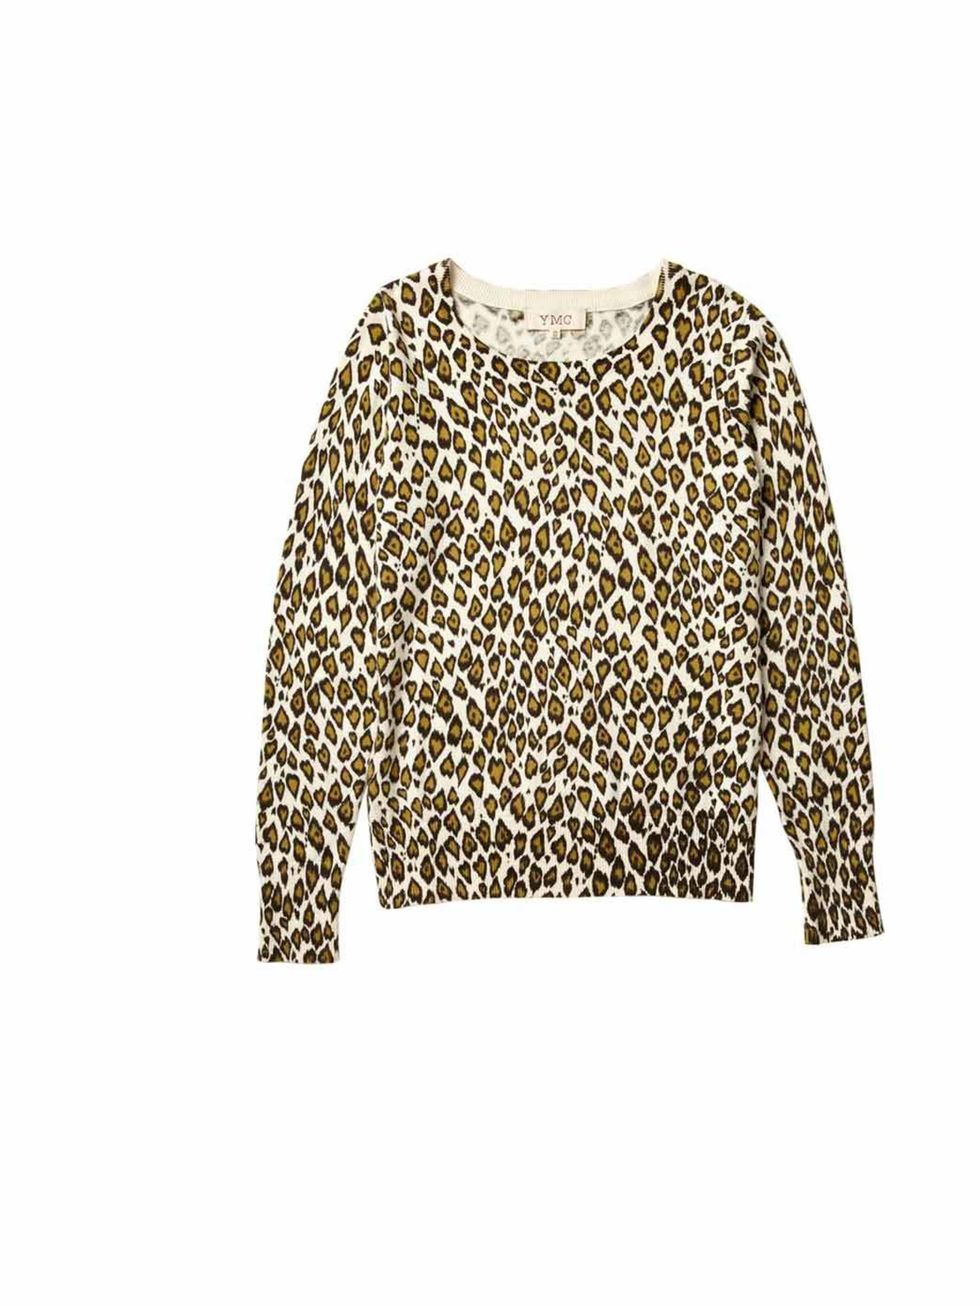 <p>Teamed with boyfriend jeans or statement mini, this YMC sweater is an instant hit of color and print to your new season wardrobe... <a href="http://www.youmustcreate.com/products/new-in-womens/leopard-knit/">YMC</a> leopard print sweater, £145</p>